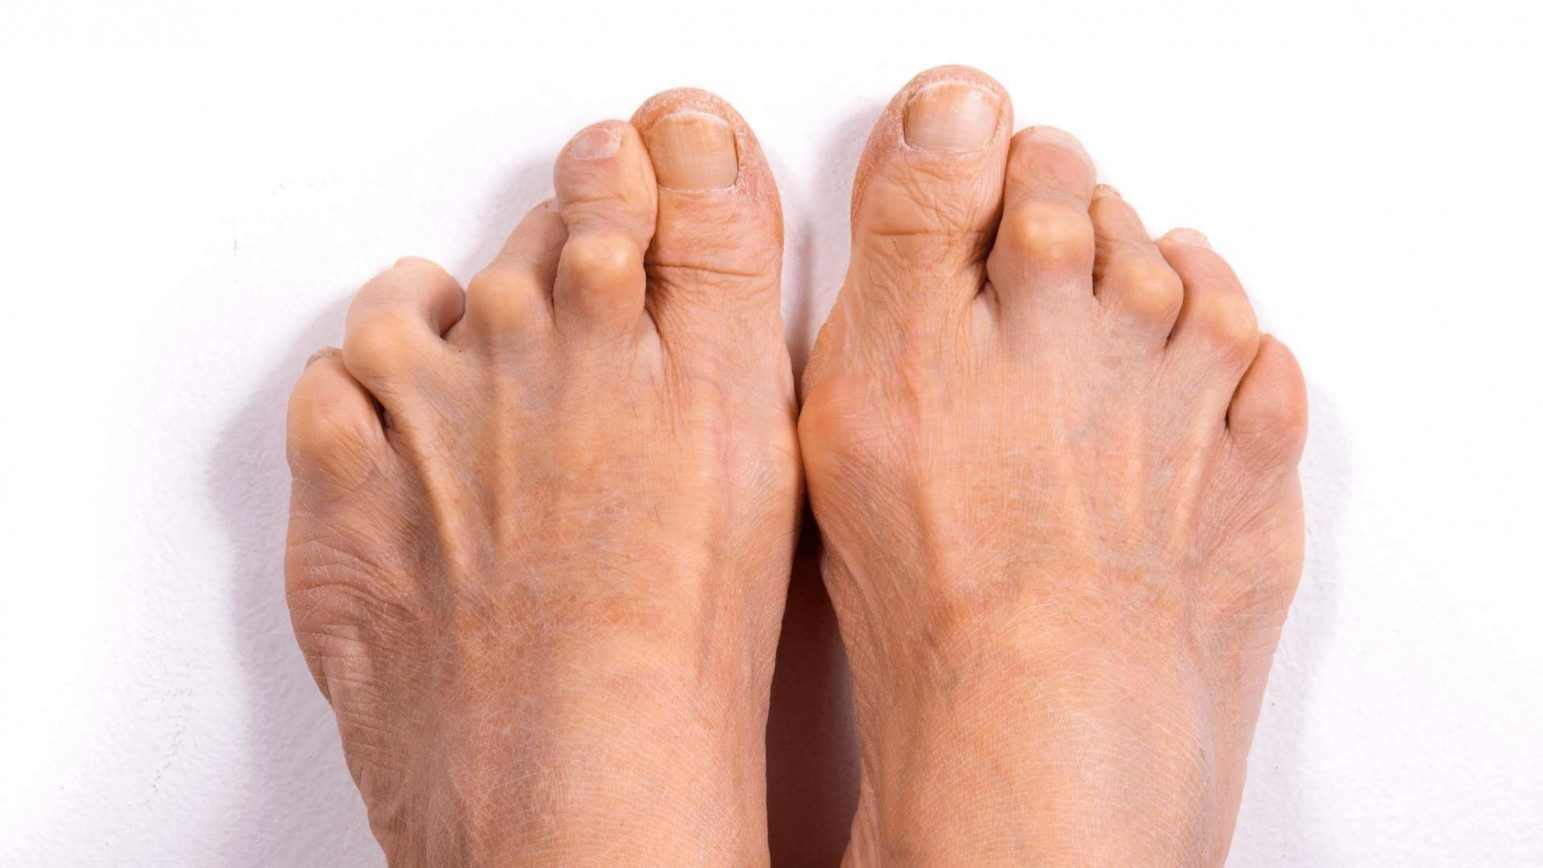 Top of two feet with bunched up toes showing the physical signs and symptoms of rheumatoid arthritis